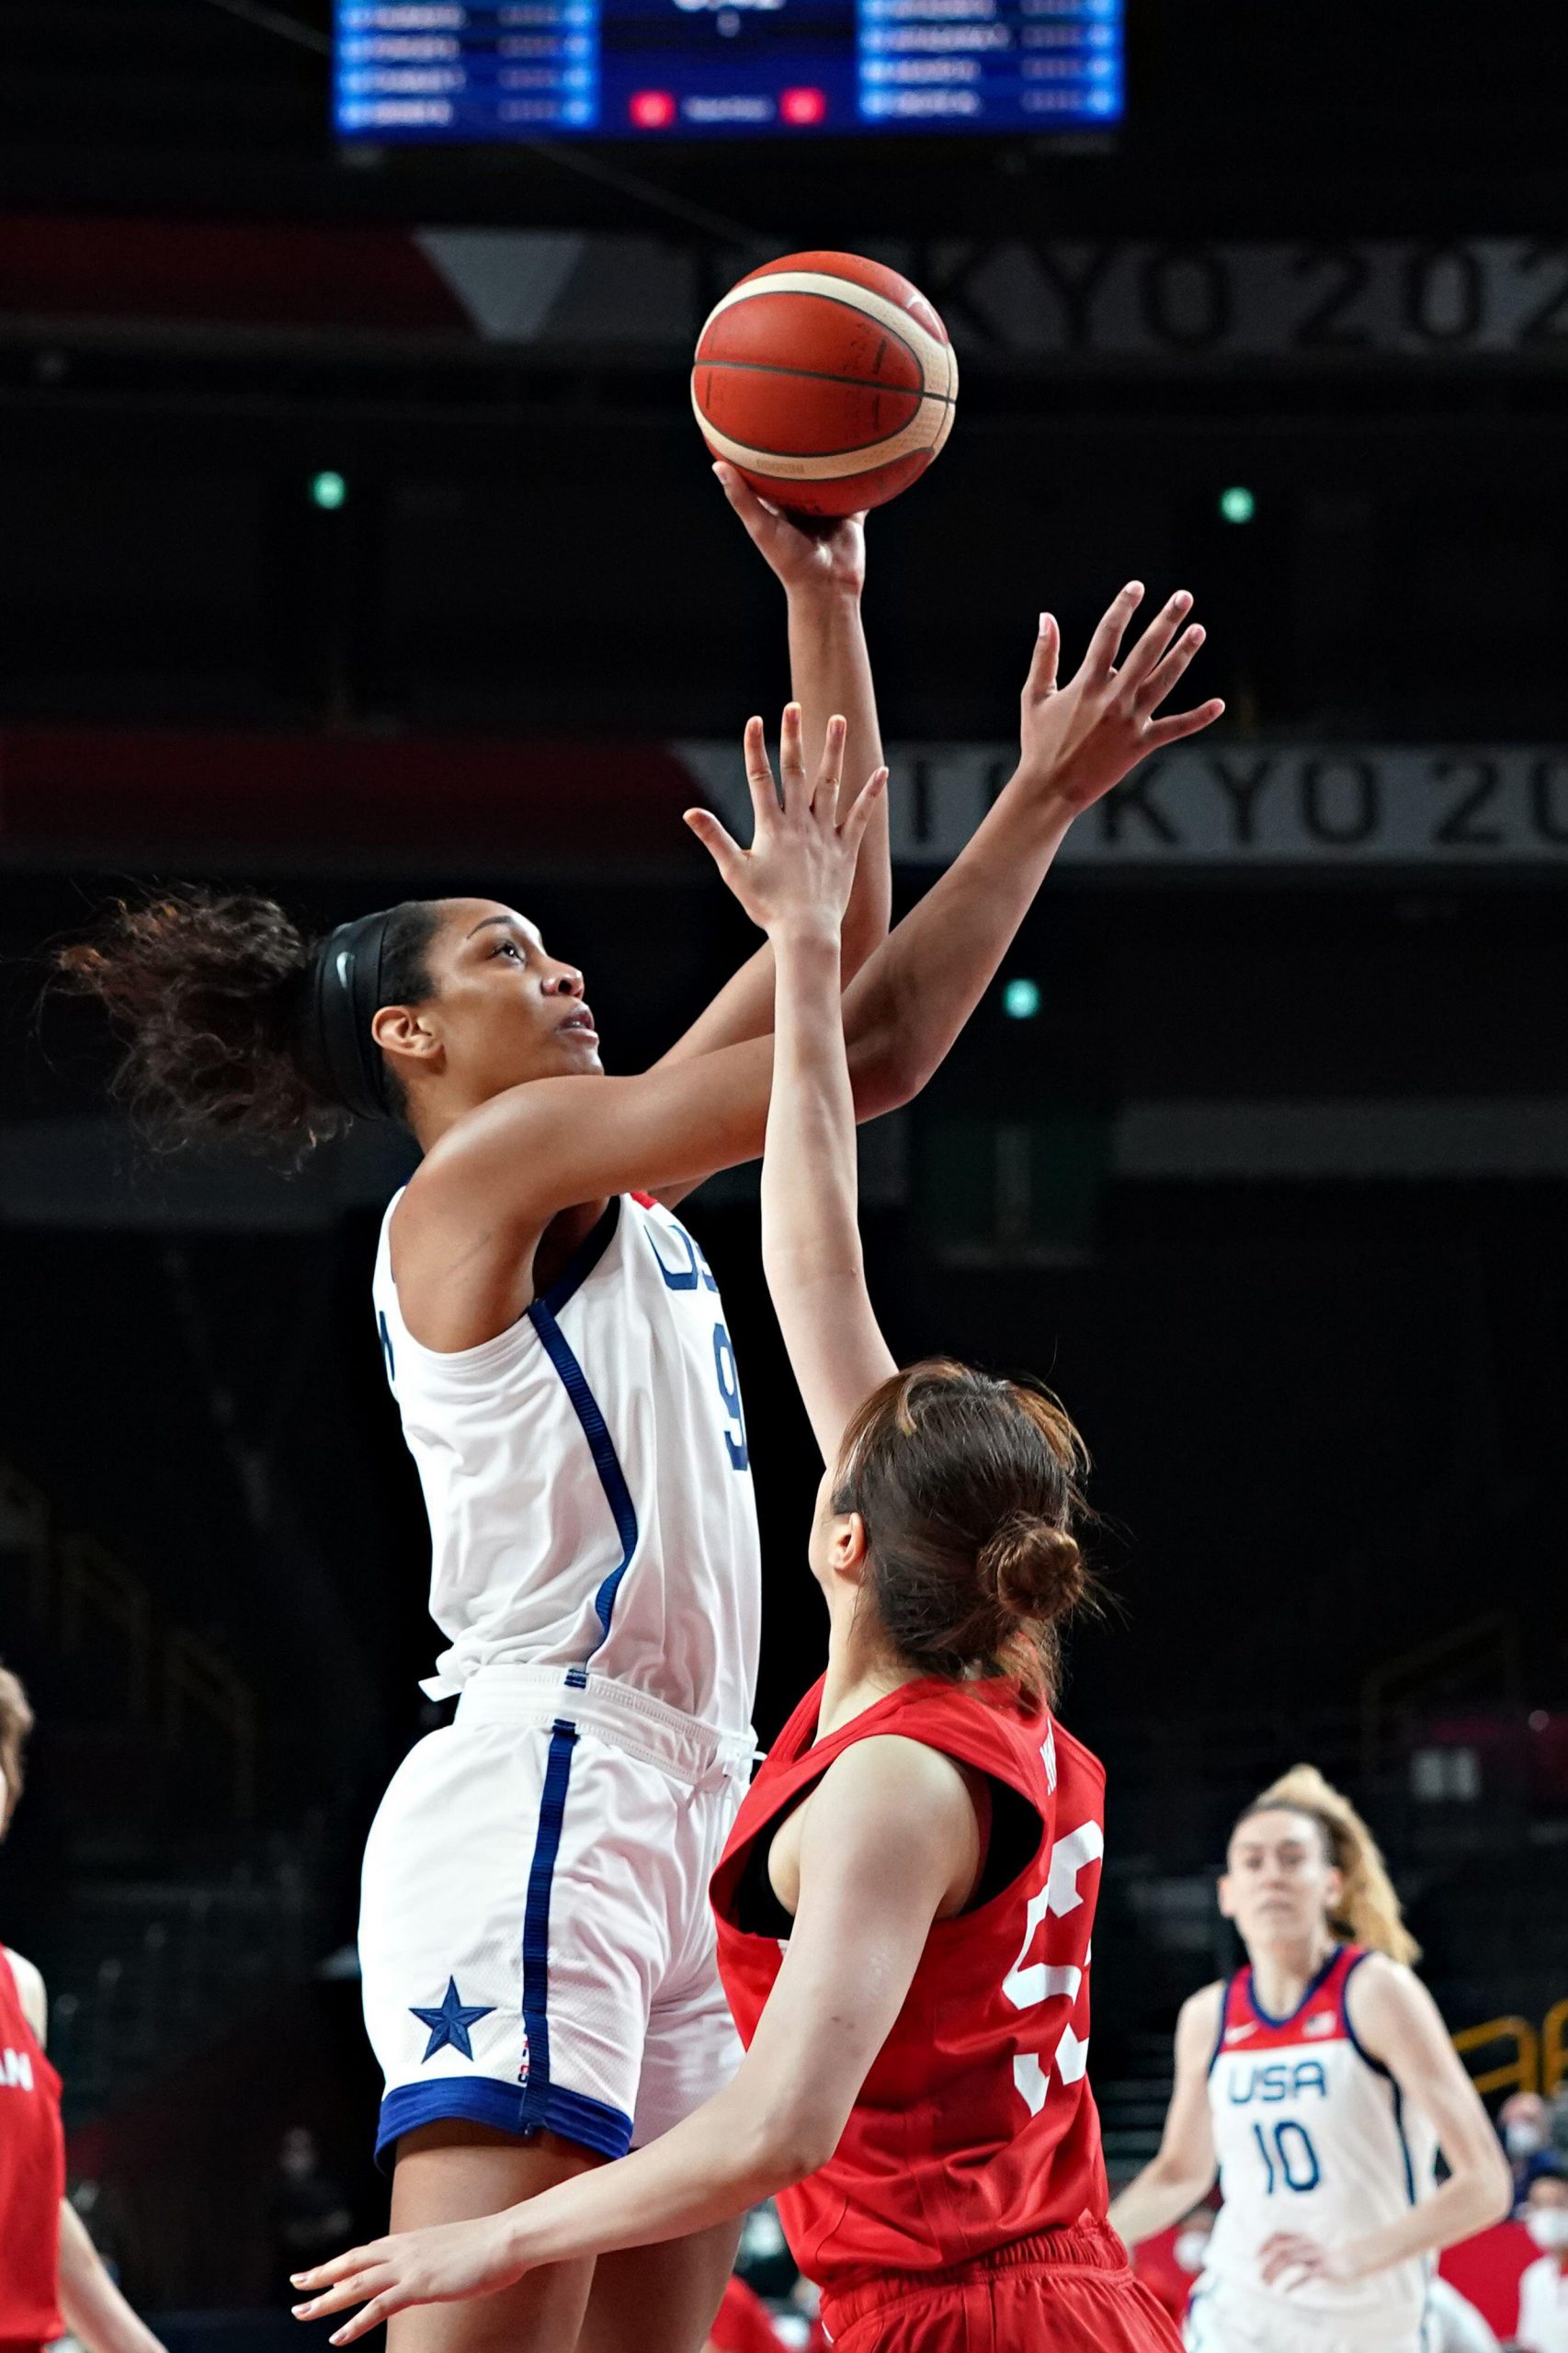 A’ja scores a jump shot for the USA Basketball 2020 National Team in Tokyo, Japan.